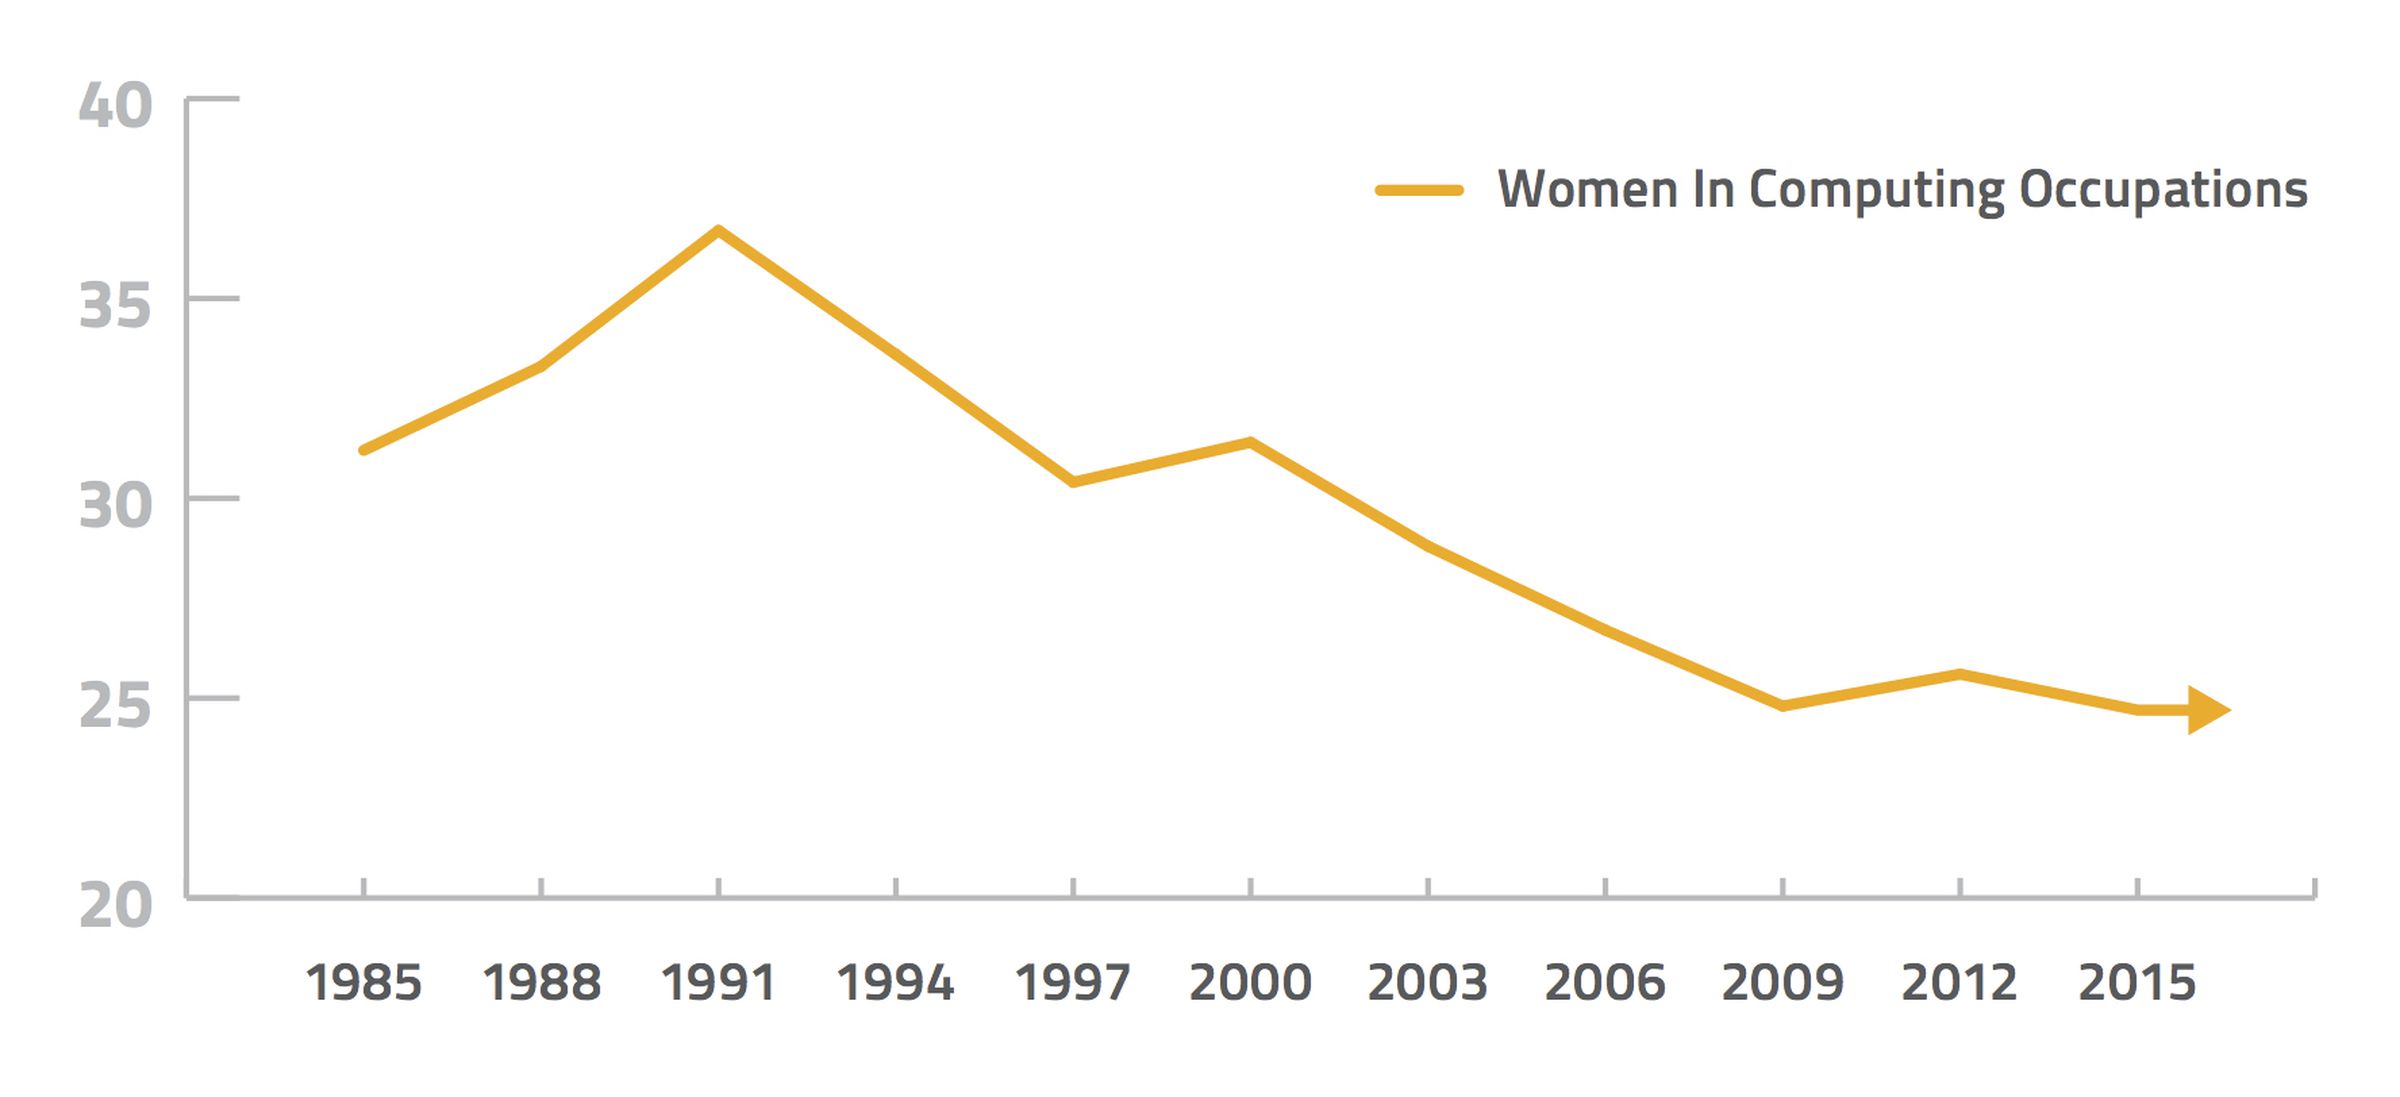 Chart showing decline of women in computing positions from 1985 to 2015